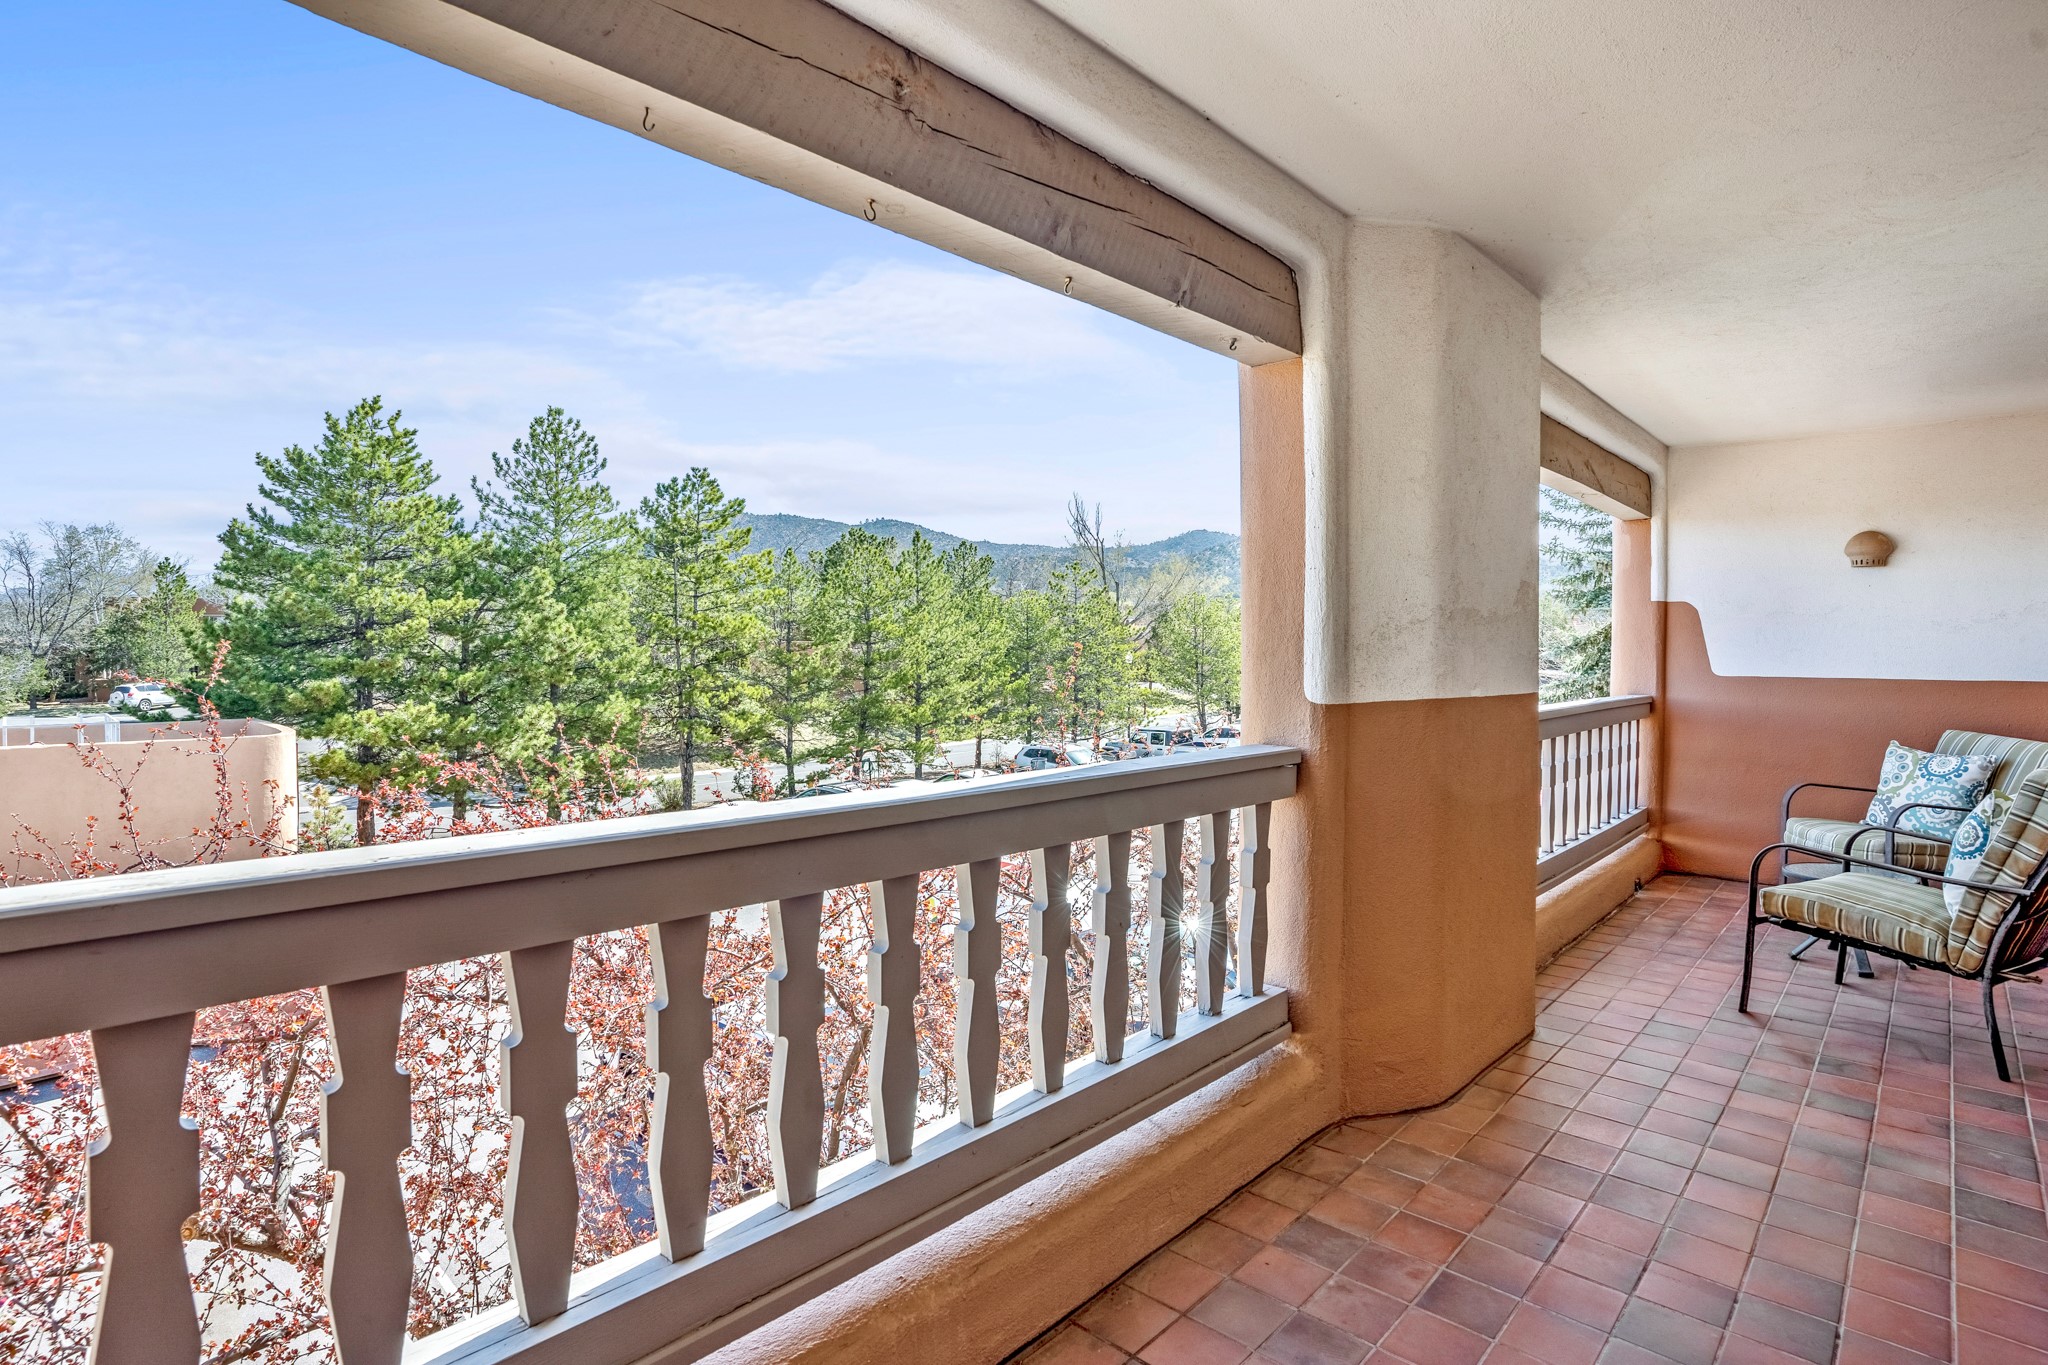 3101 Old Pecos Trail 302, Santa Fe, New Mexico 87505, 2 Bedrooms Bedrooms, ,2 BathroomsBathrooms,Residential,For Sale,3101 Old Pecos Trail 302,202337665